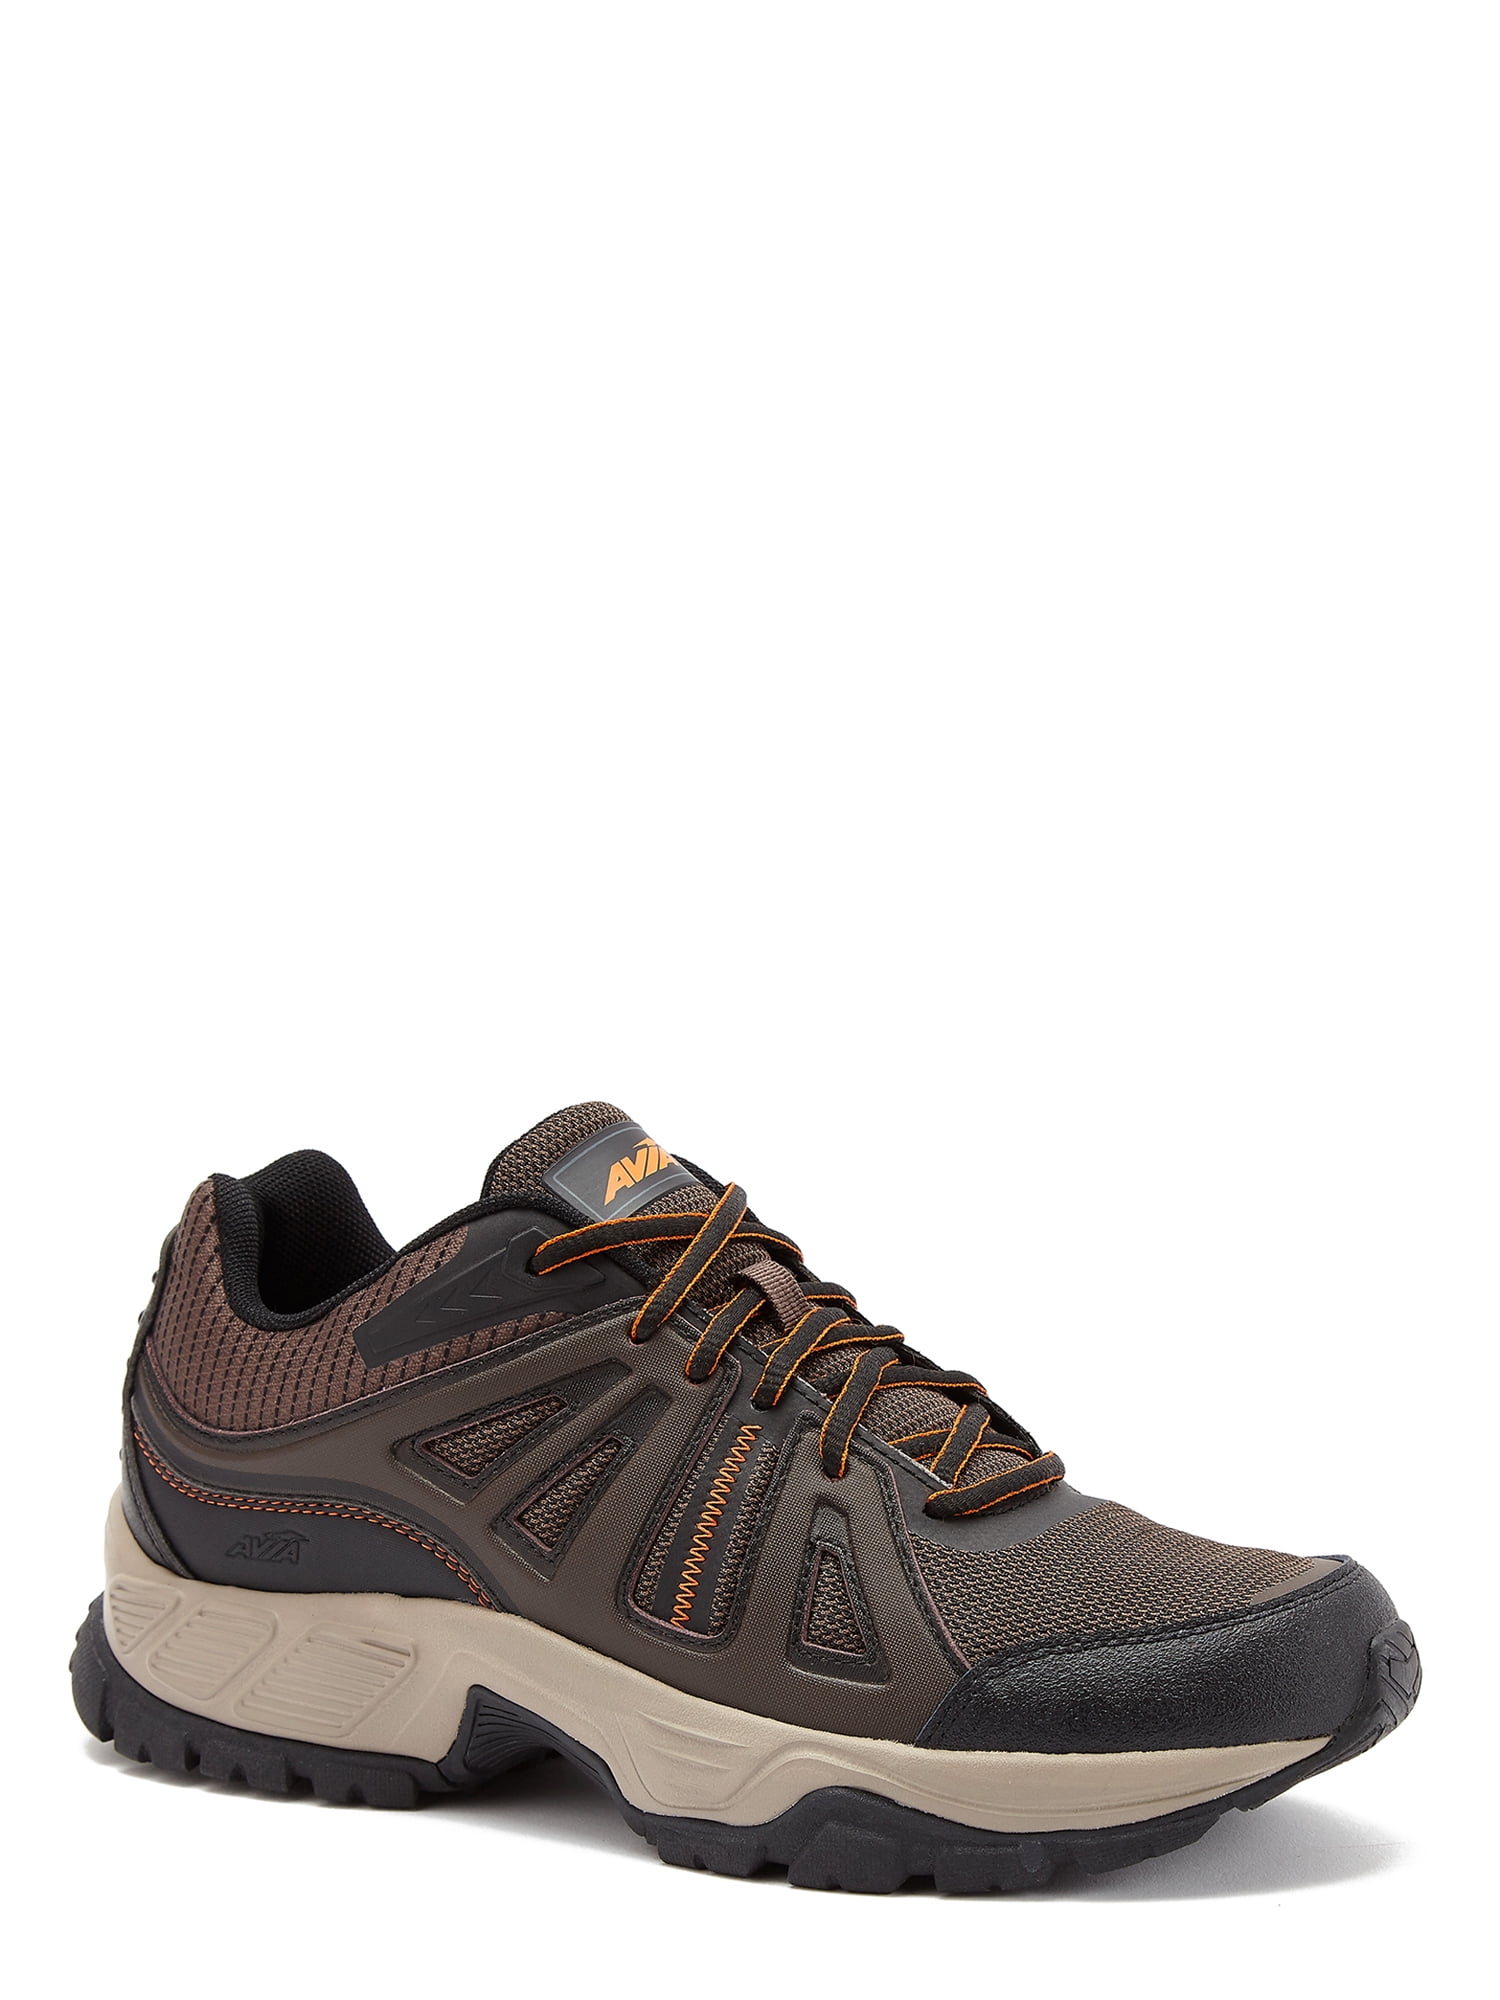 Mens TAN & BLACK ATHLETIC SHOES Lt Weight AVIA Lace Up 7.5 8 8.5 9 9.5 10 12 